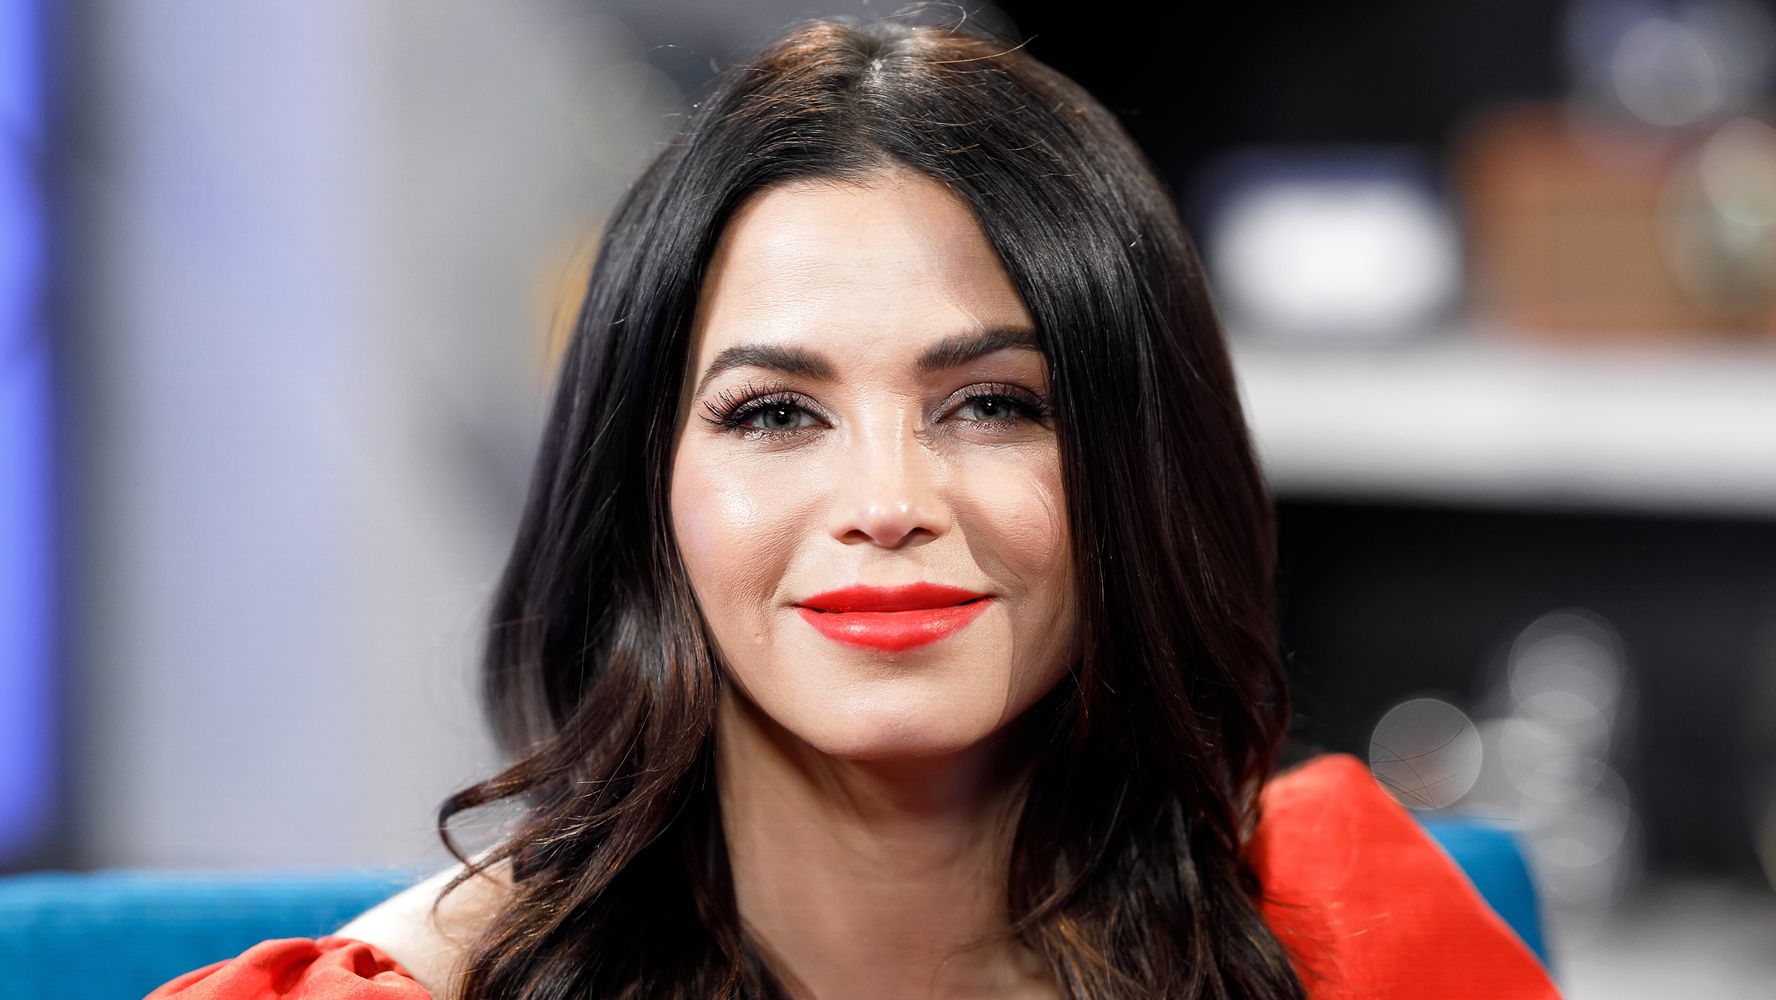 Jenna Dewan On Daughter's Birth: Ex Channing Tatum 'Wasn't Available' For Weeks After